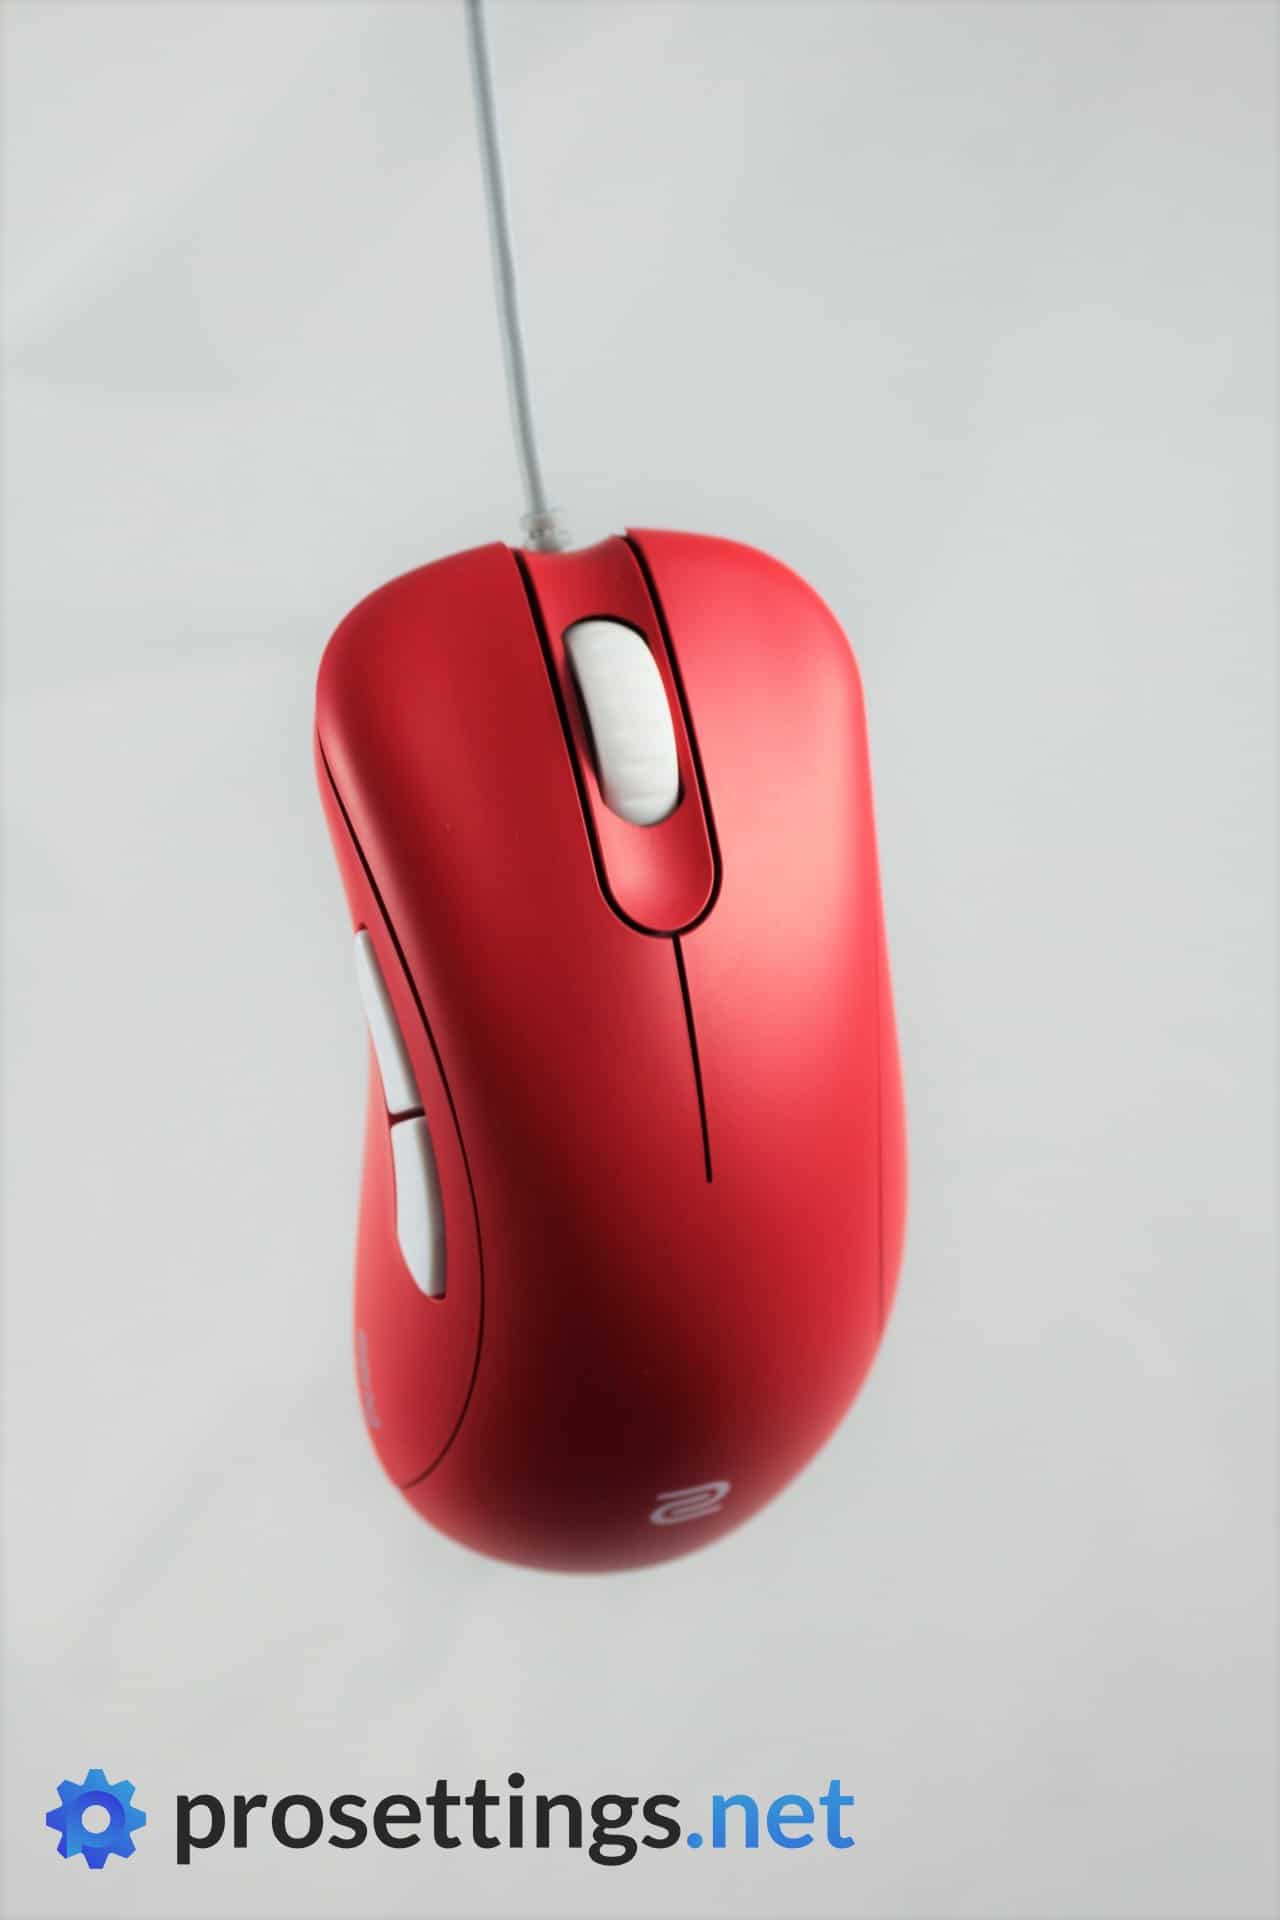 Zowie EC Tyloo Mouse Review